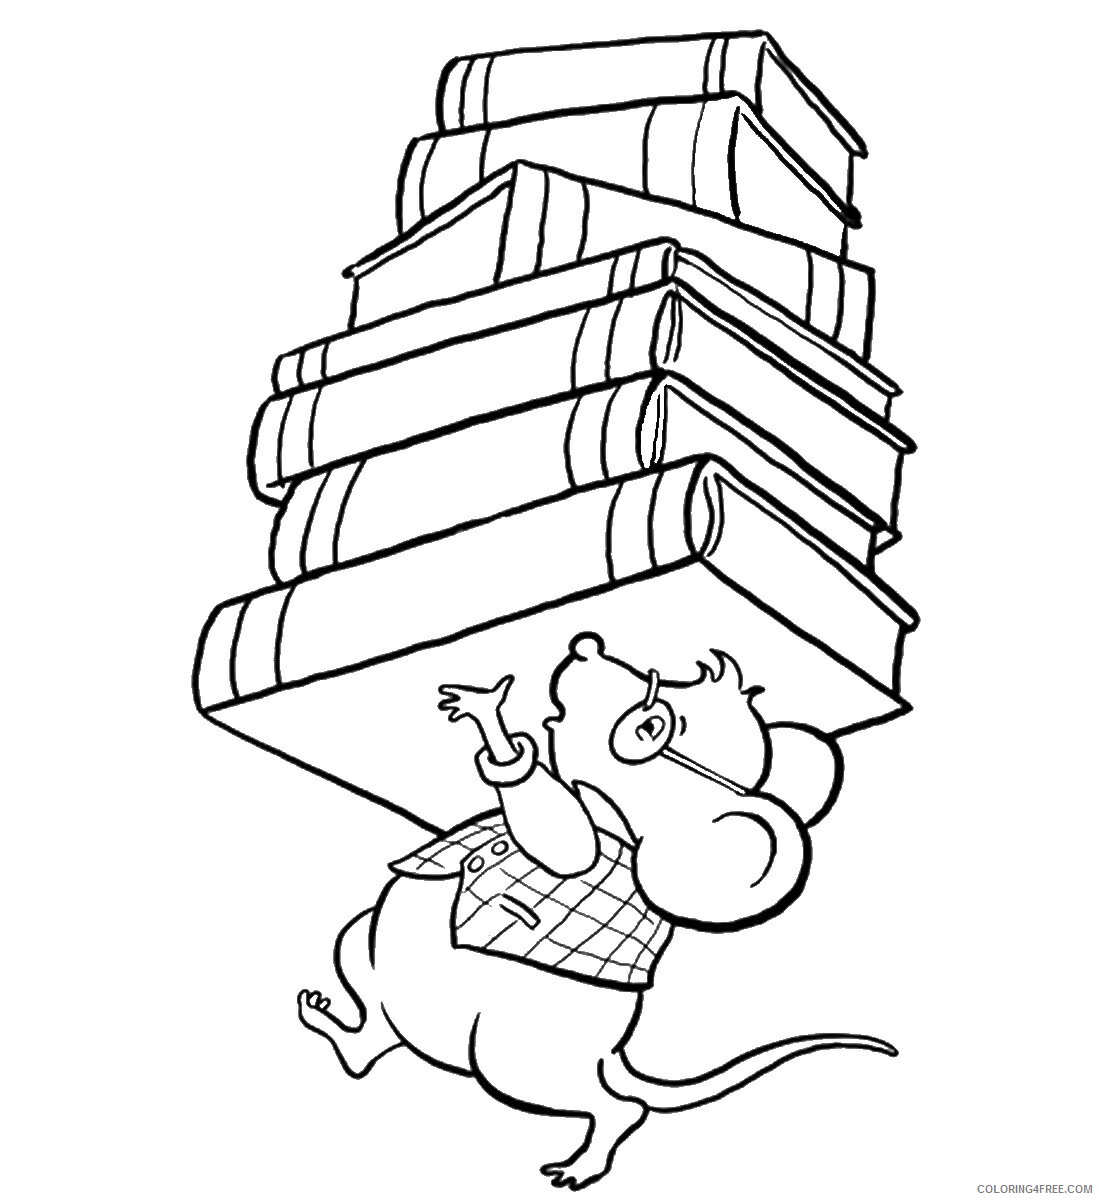 School Coloring Pages school_cl_35 Printable 2021 5248 Coloring4free